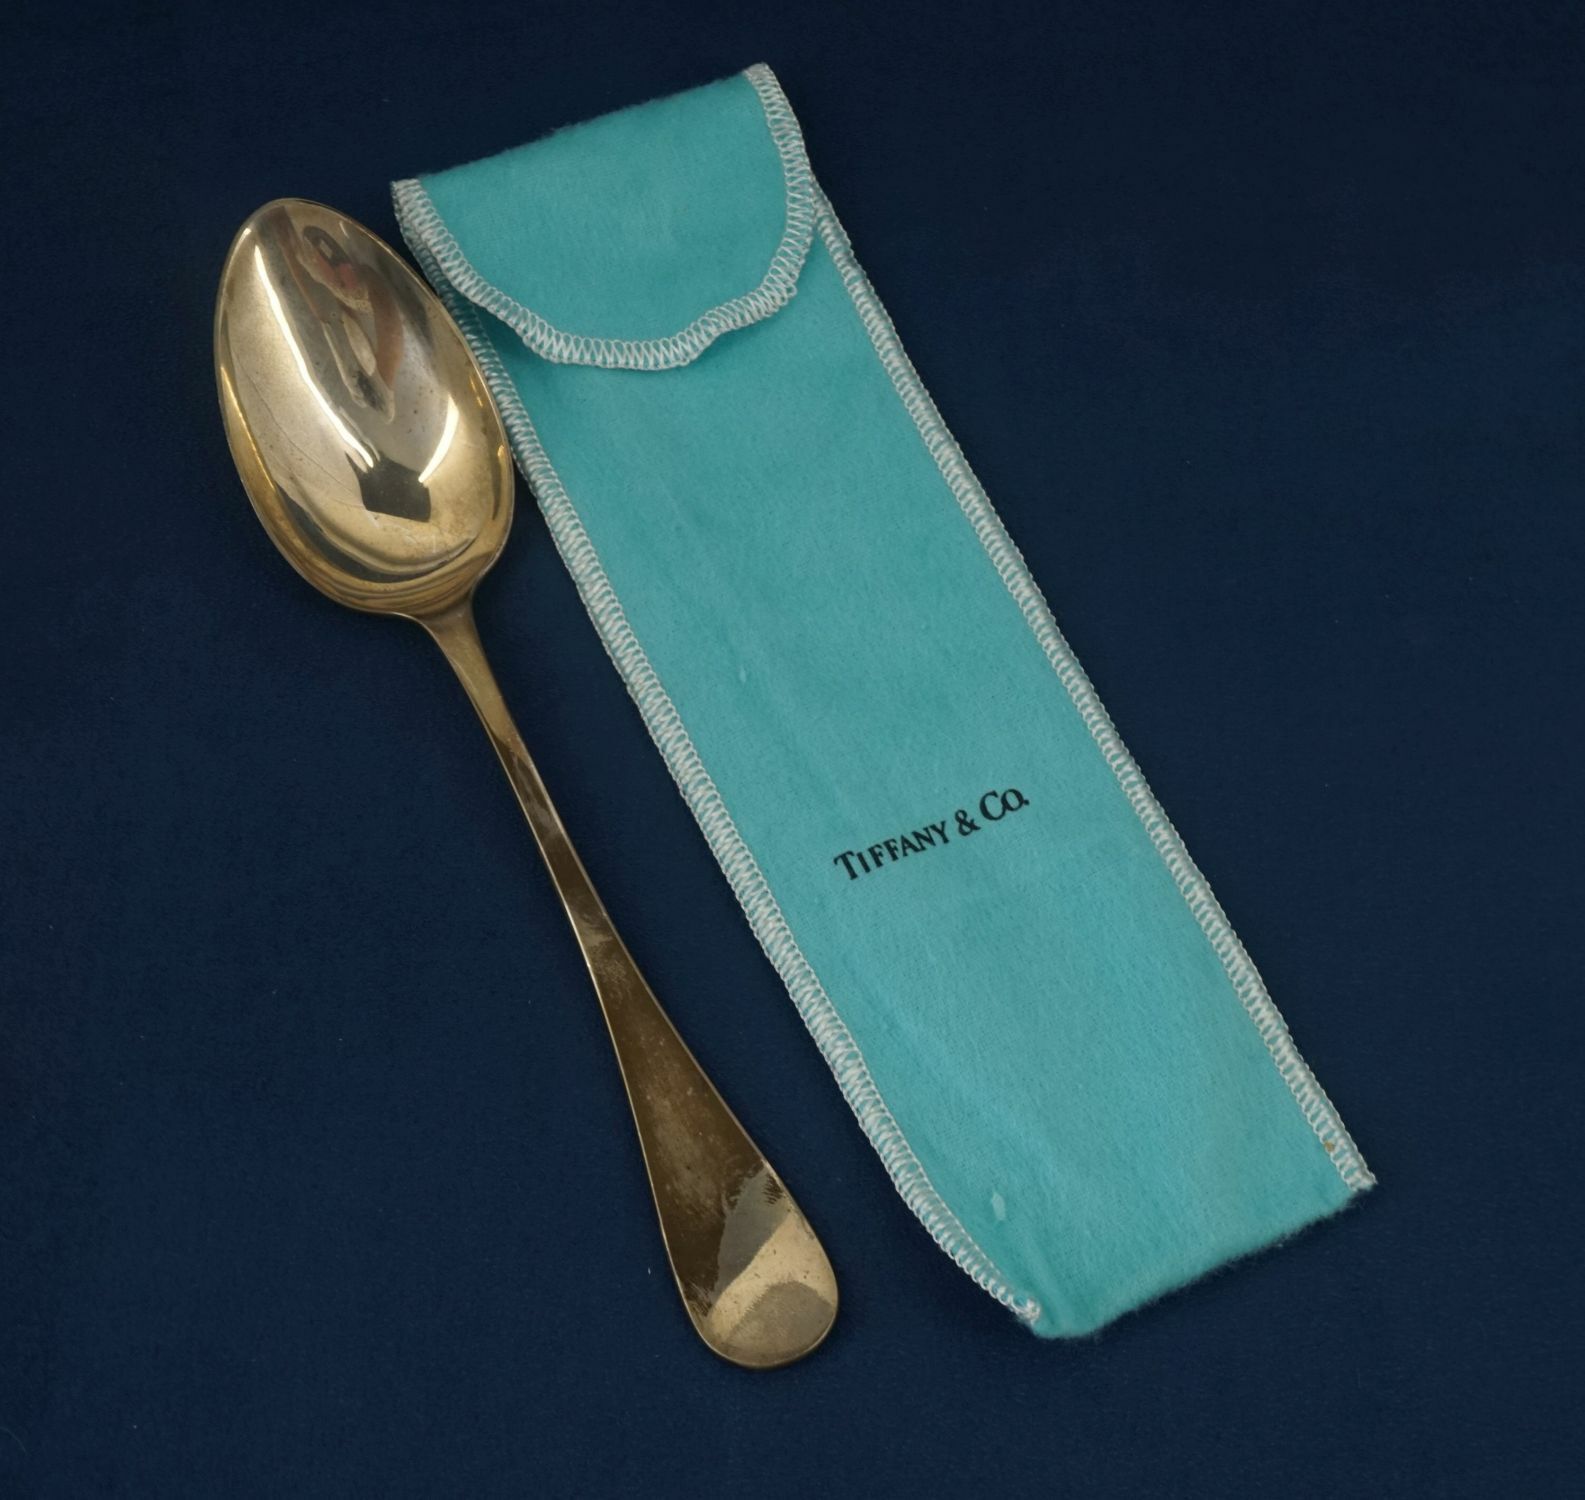 Tiffany & Co. King William Sterling Silver Serving Spoon - Free Shipping USA